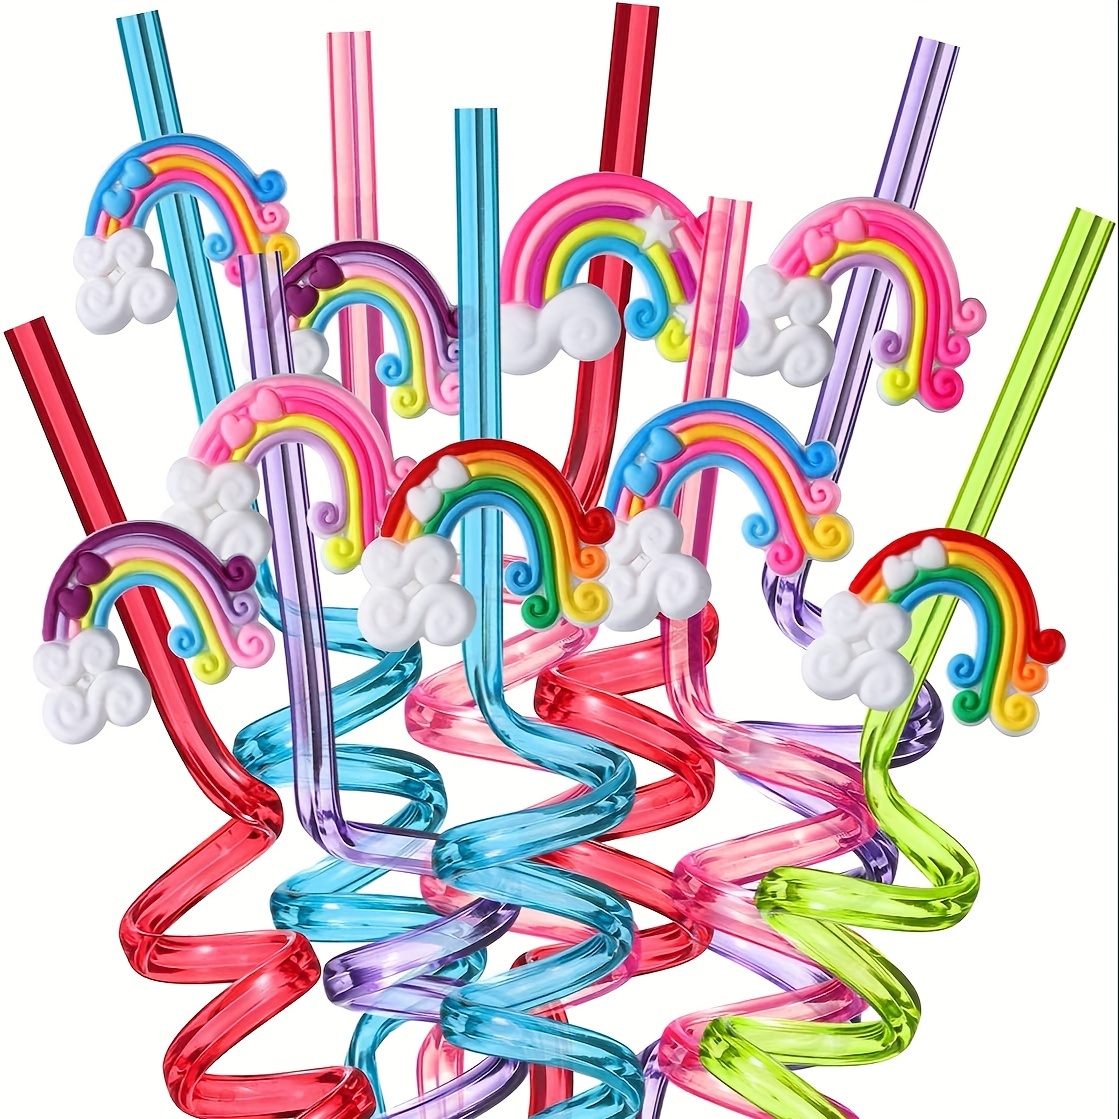 8 Pack 11 Inch Silly Crazy Straws for Kids Reusable, Dinosaur Fun Straws  Drinking Reusable Plastic Straws Curly Twisty Loopy Straws for Dino Themed